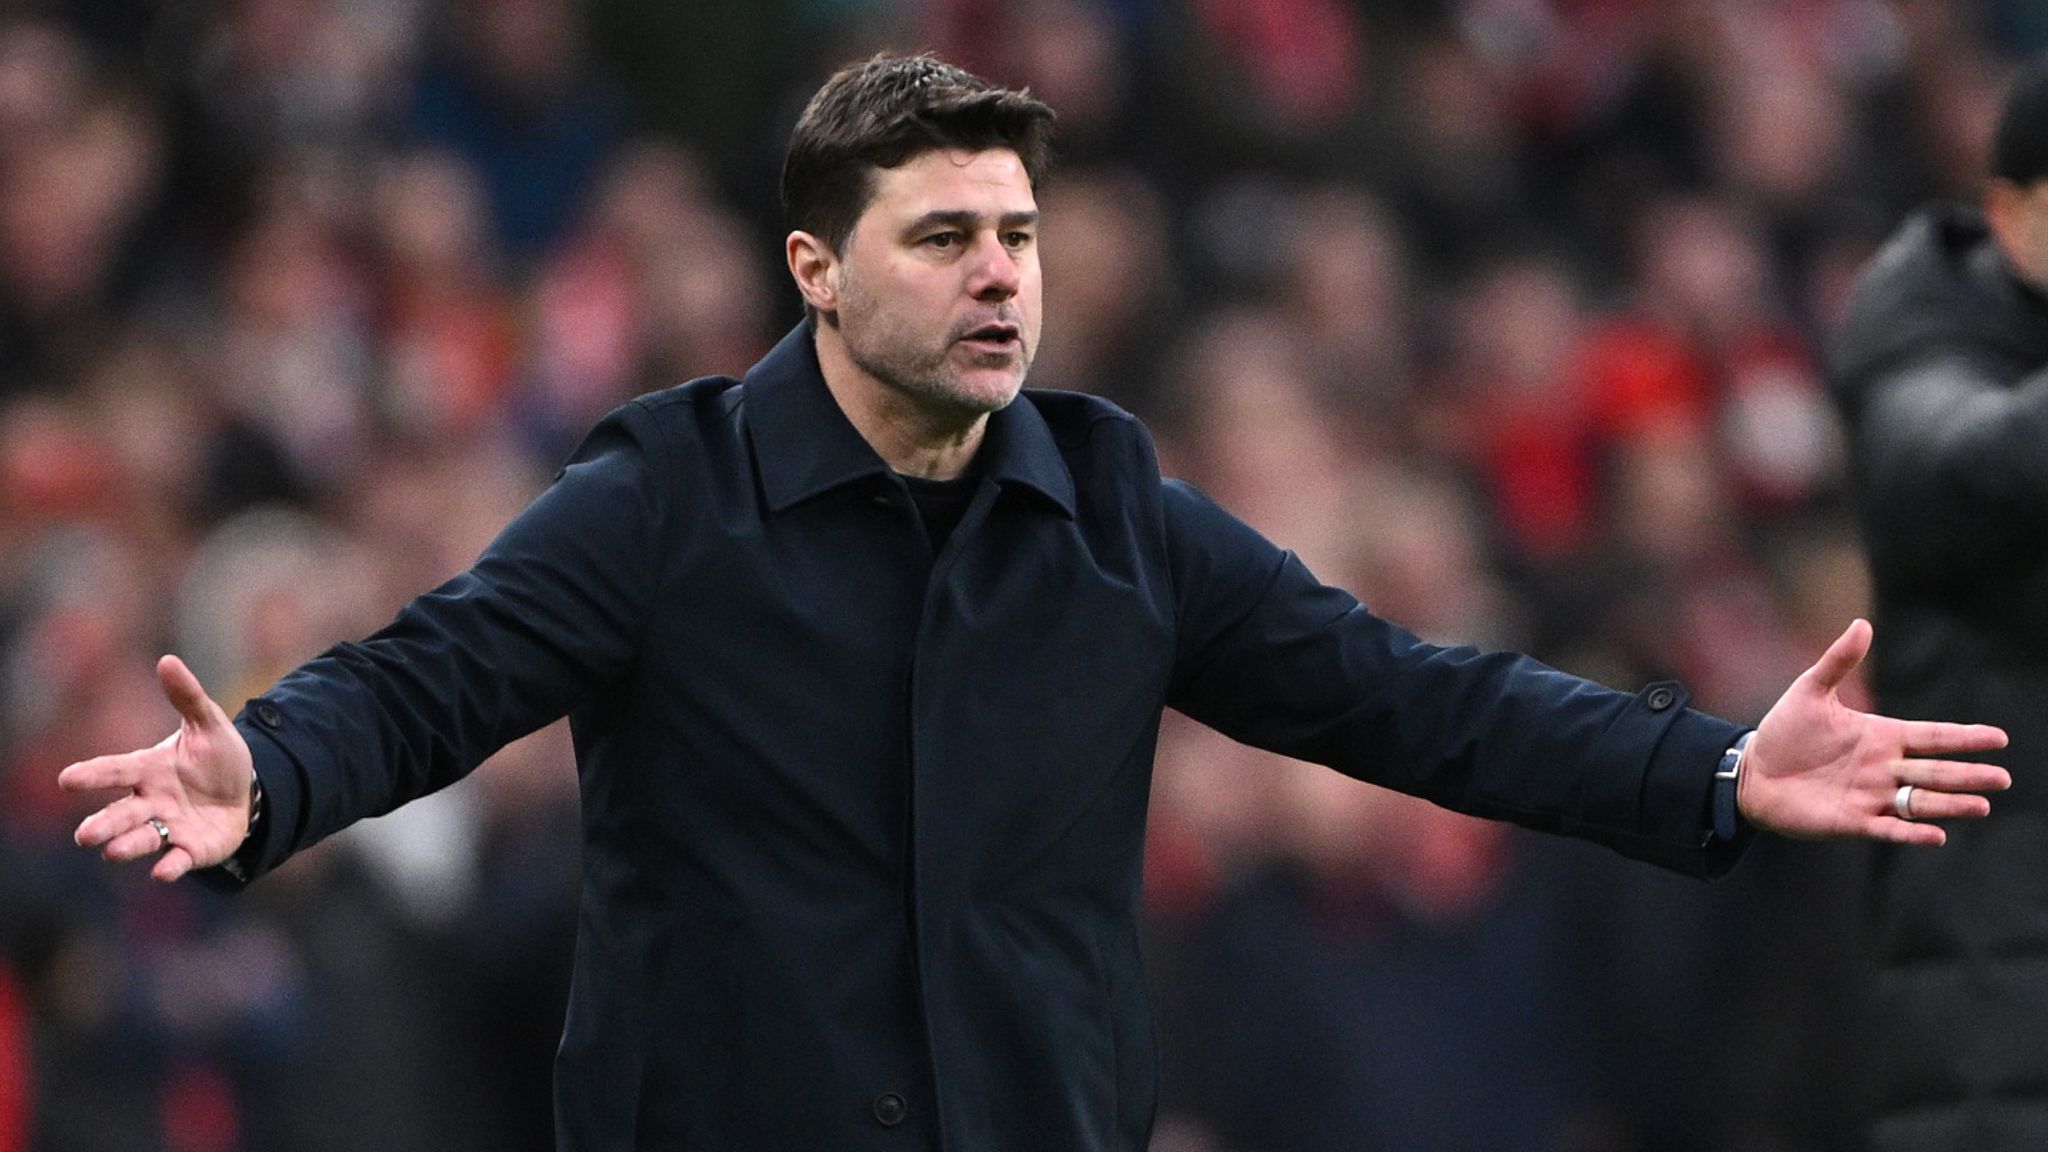 Chelsea manager Mauricio Pochettino says the club's real identity is to attack and score goals.